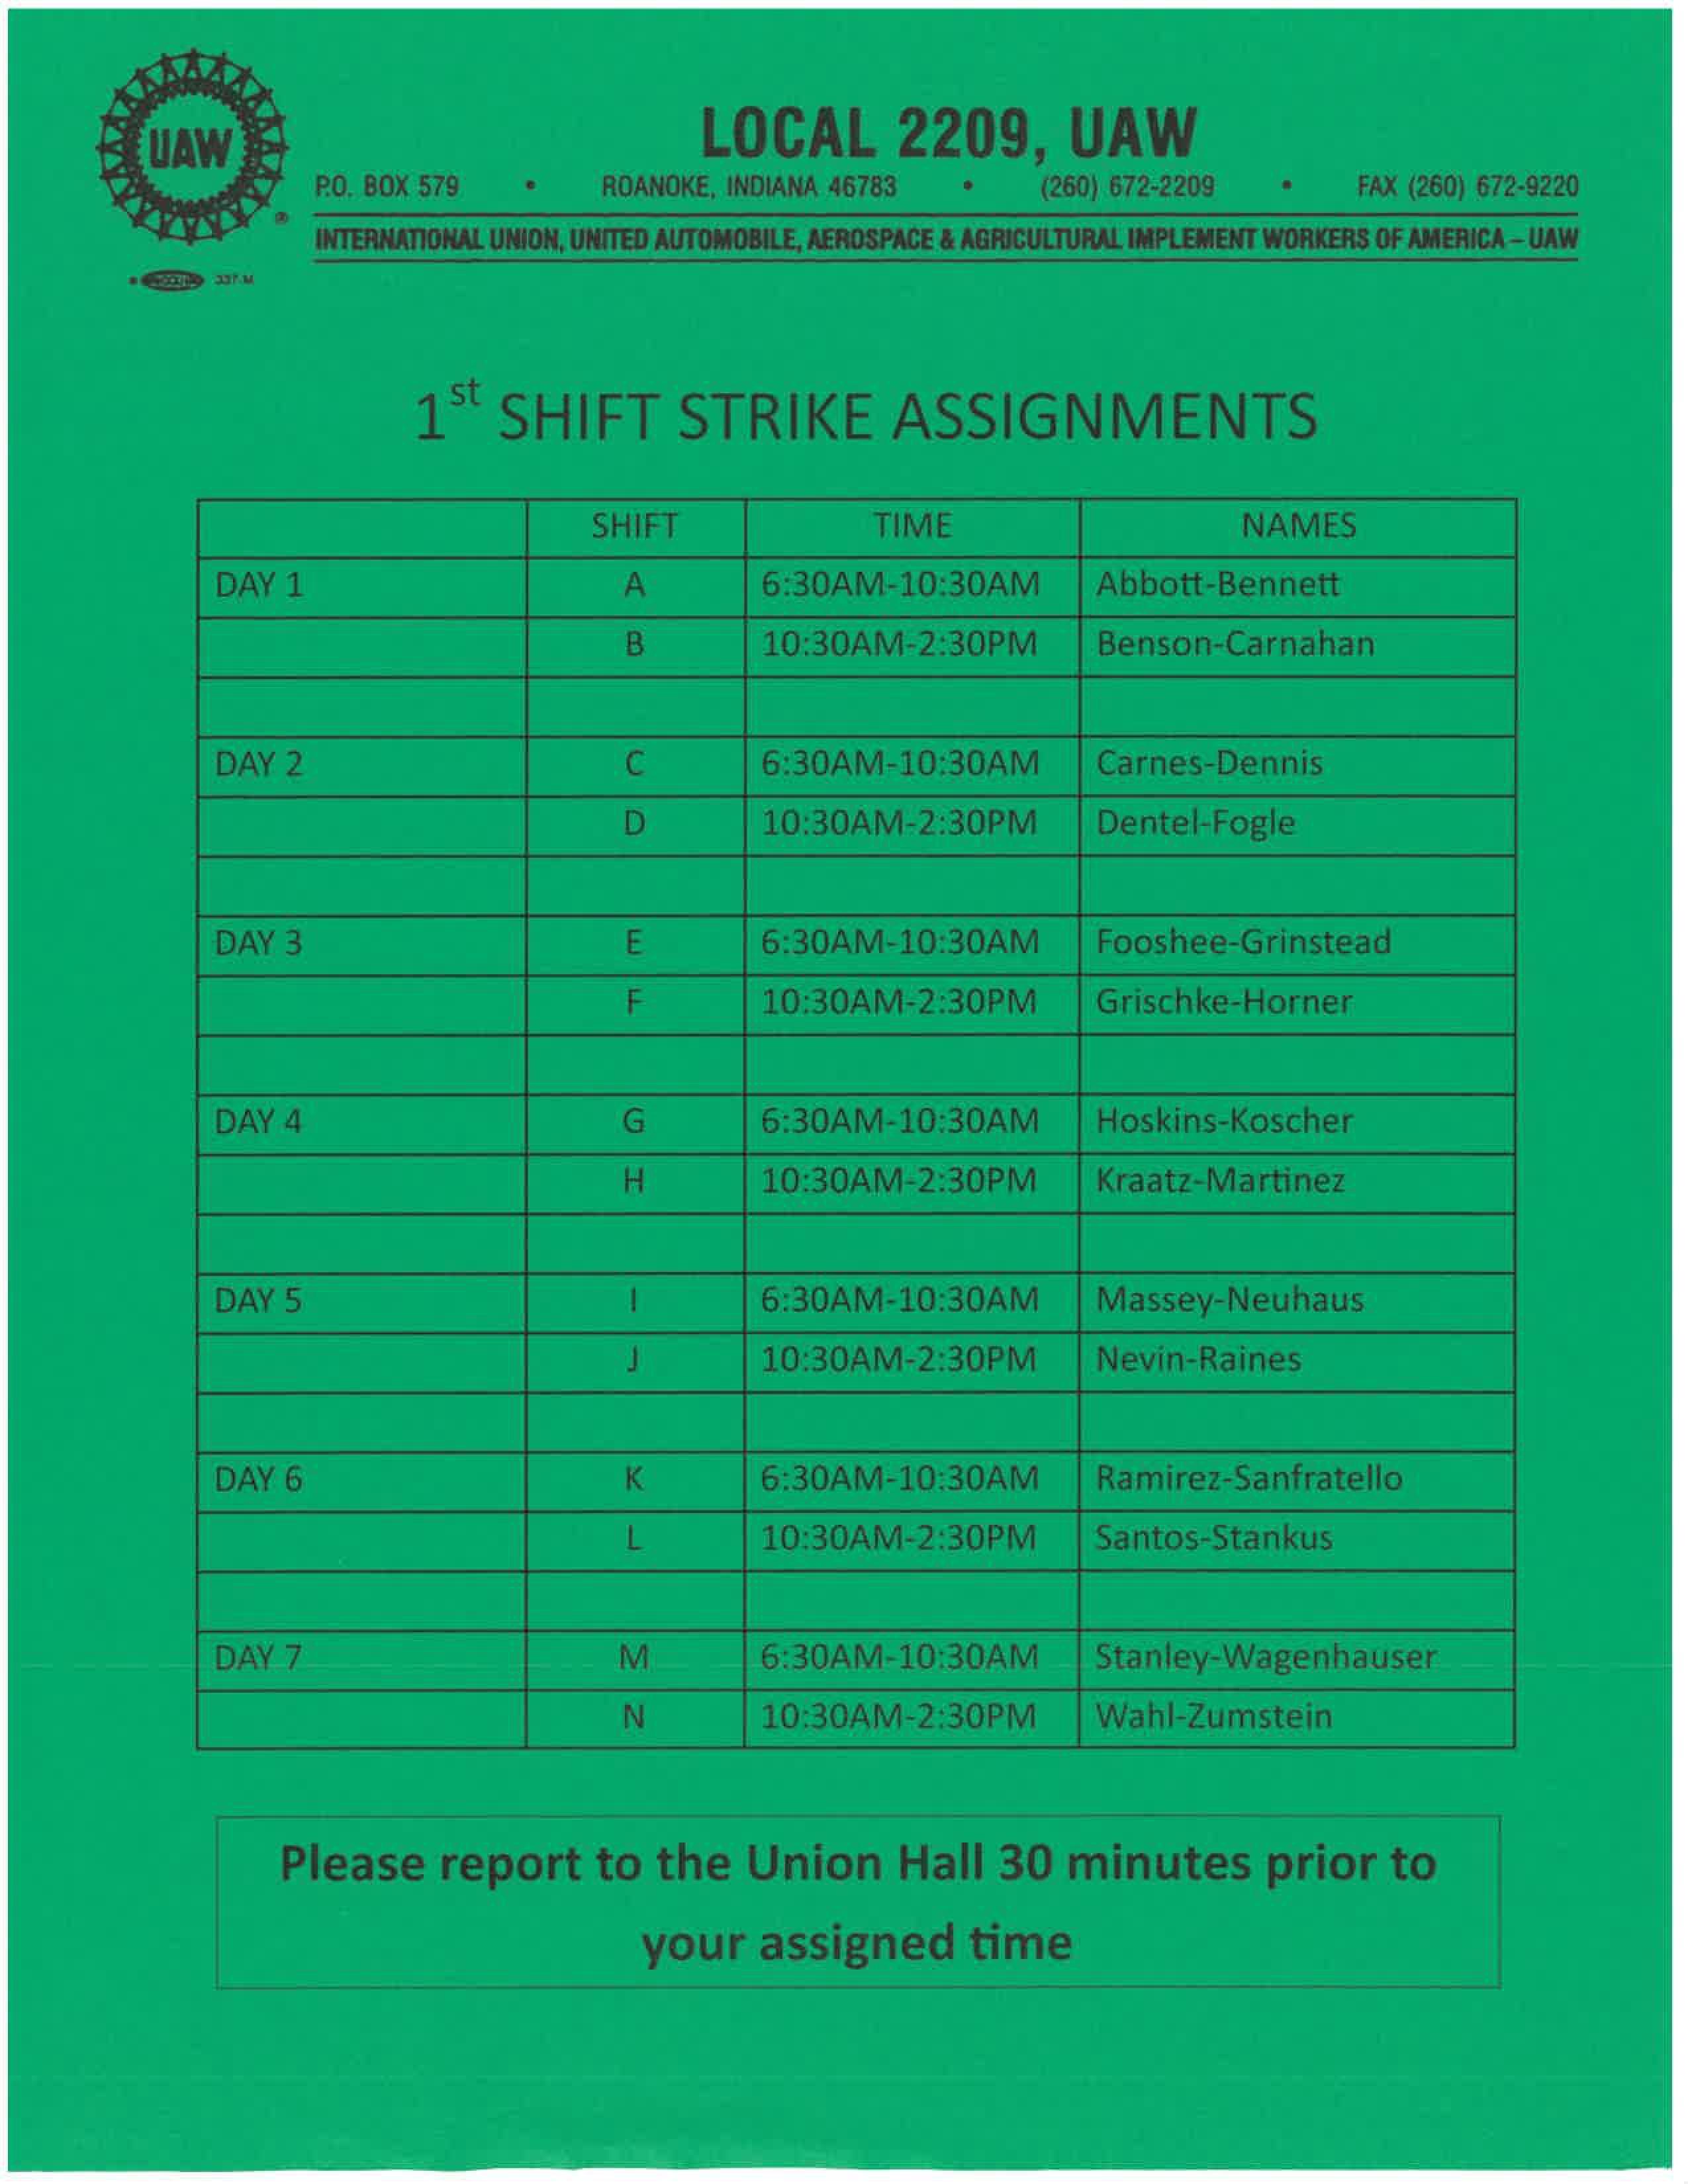 STRIKE ASSIGNMENTS UAW Local 2209